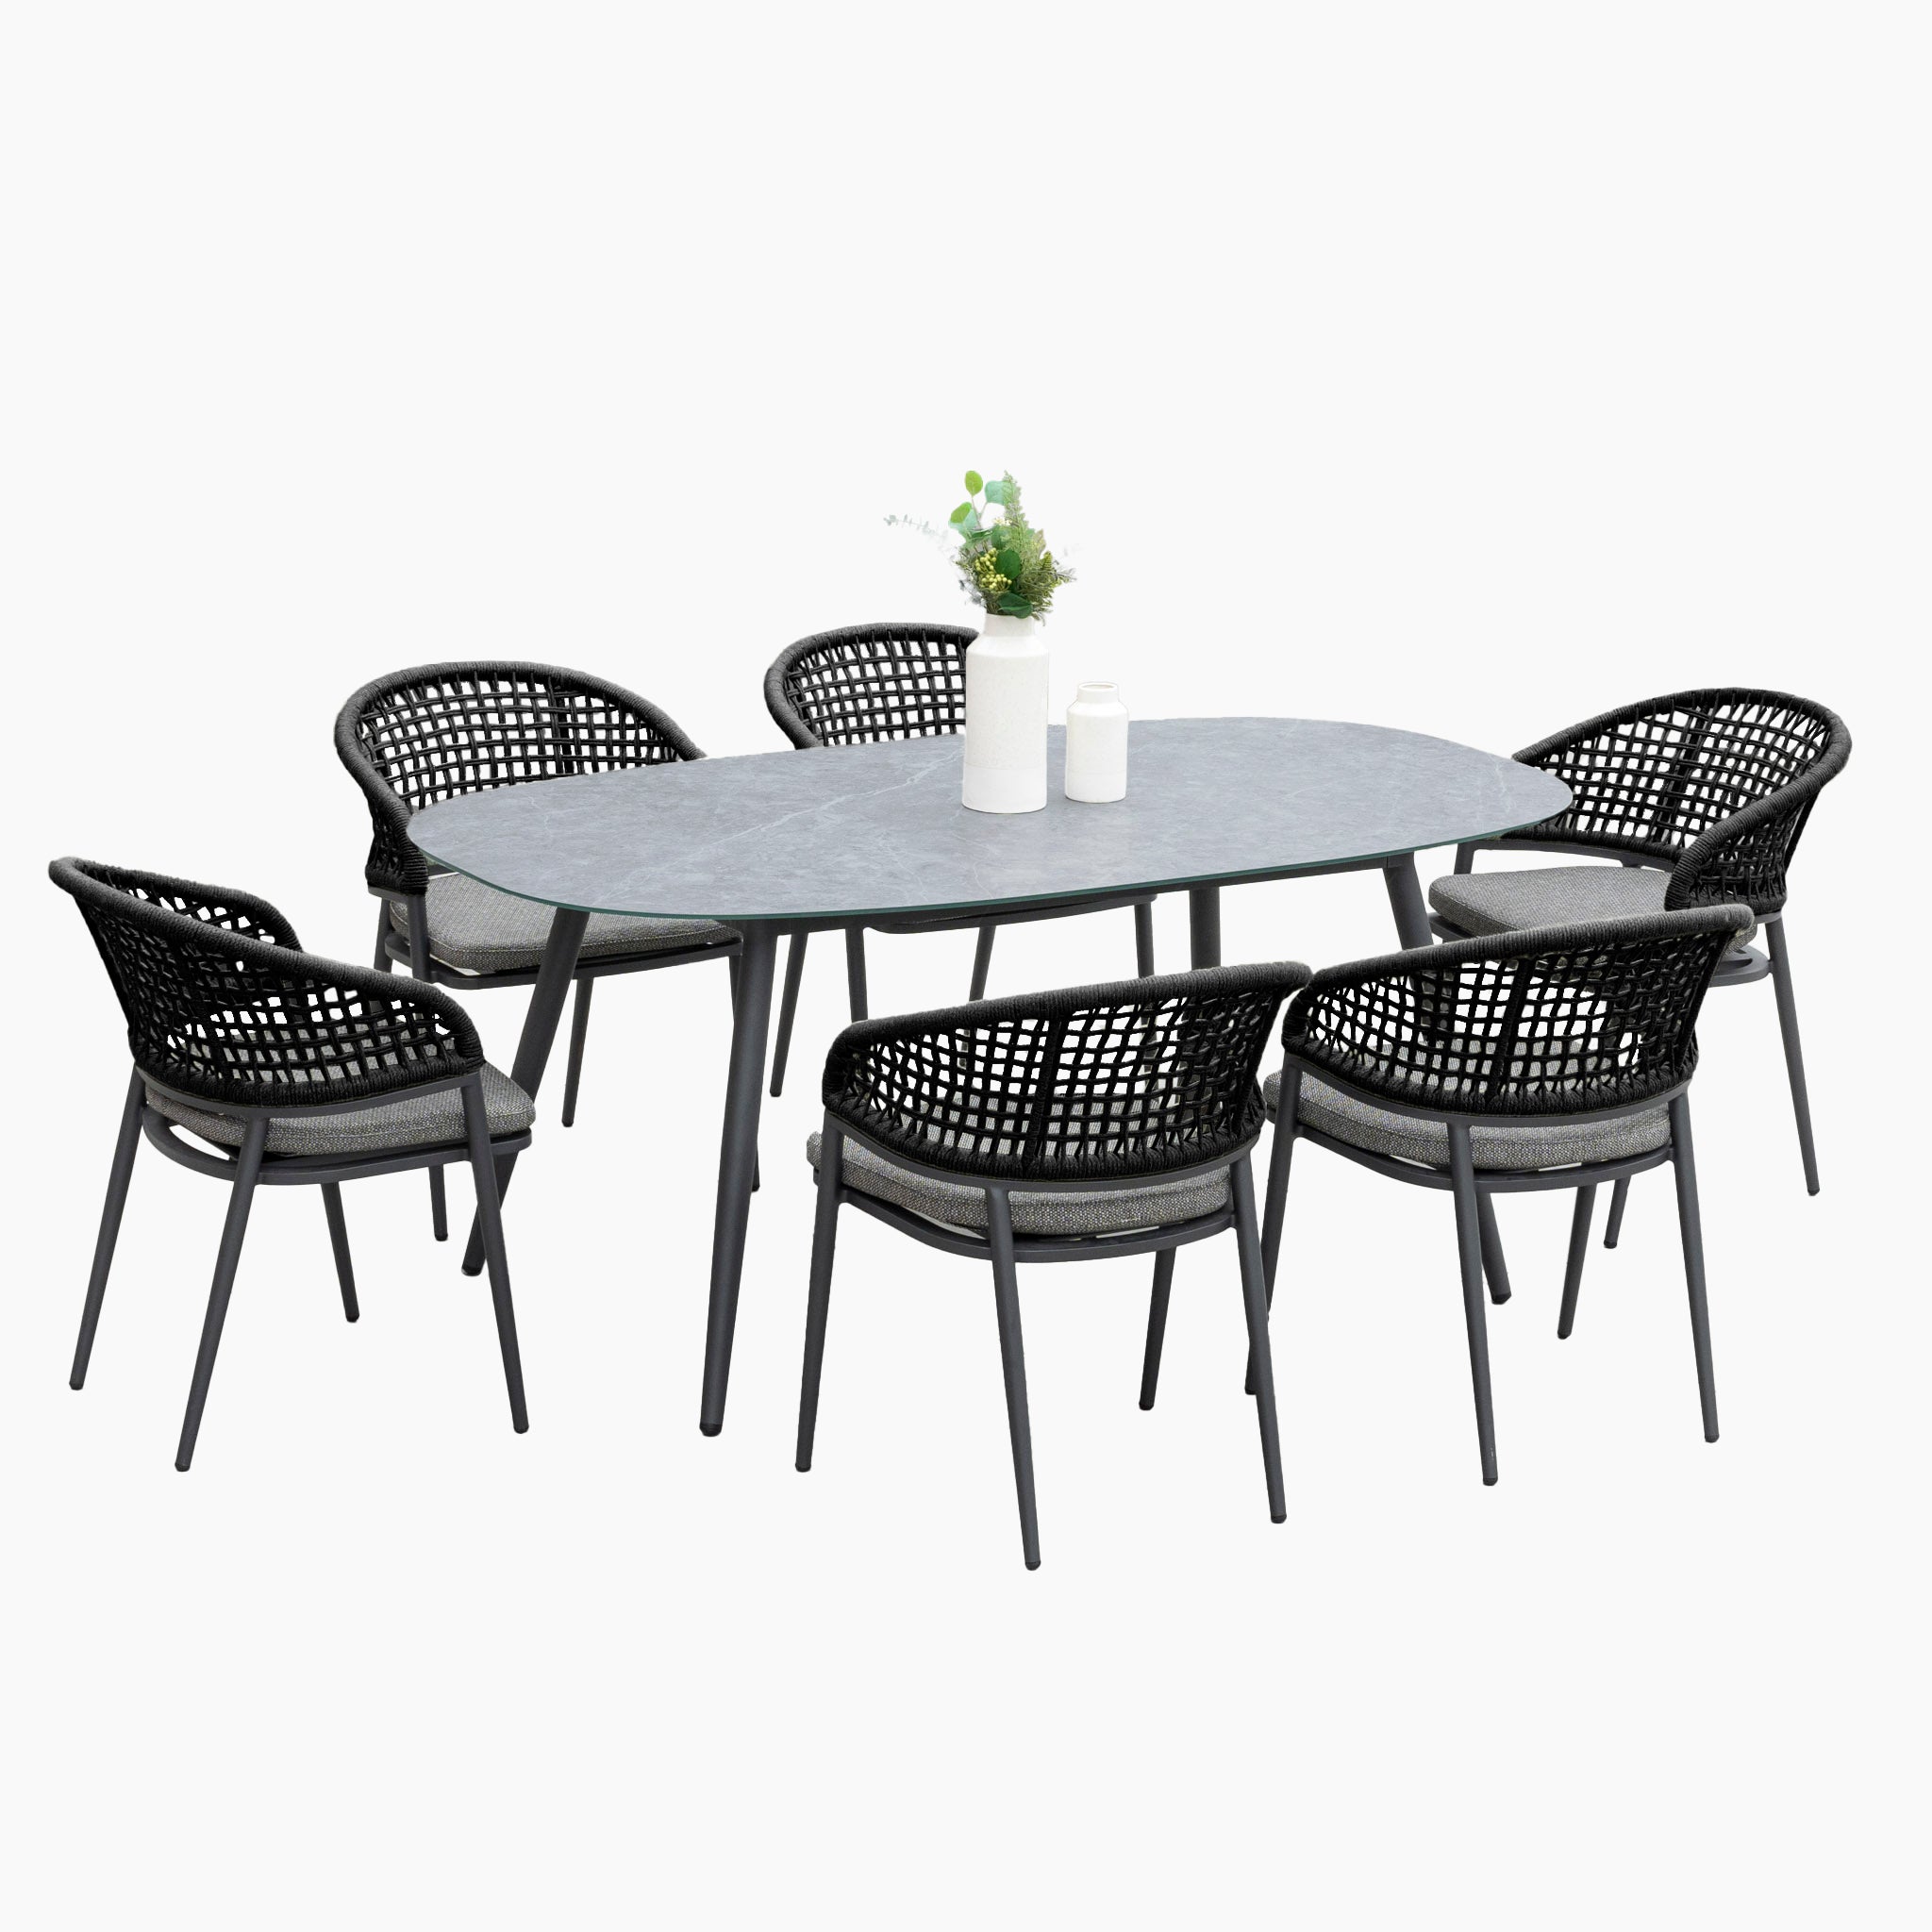 Kalama 6 Seat Rope Oval Dining Set with Ceramic Table in Charcoal